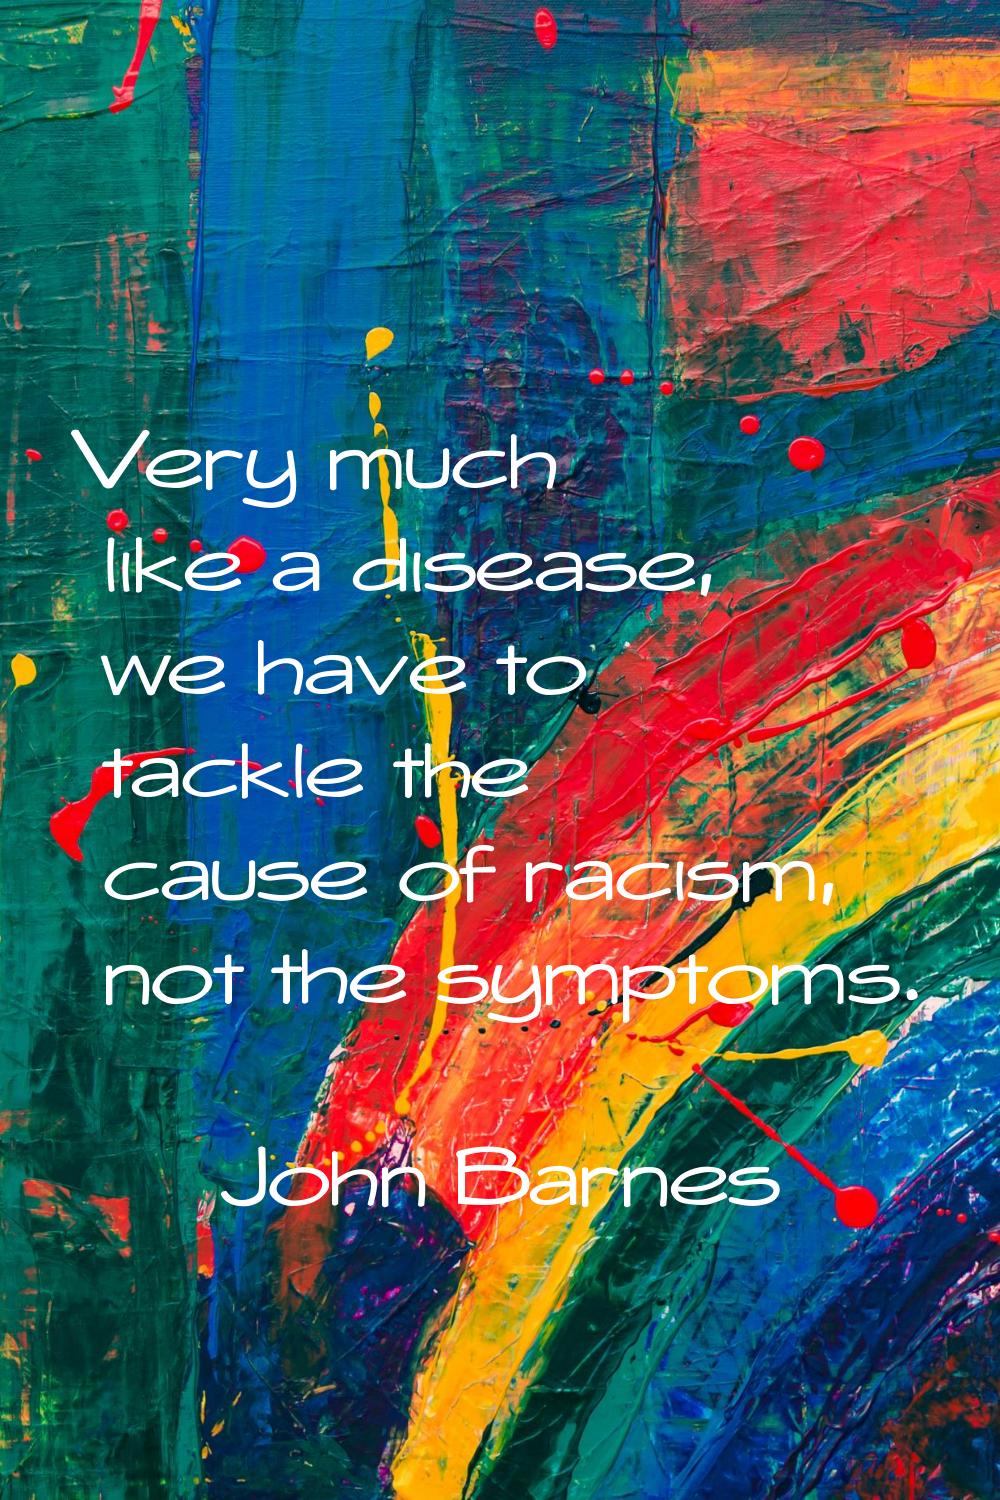 Very much like a disease, we have to tackle the cause of racism, not the symptoms.